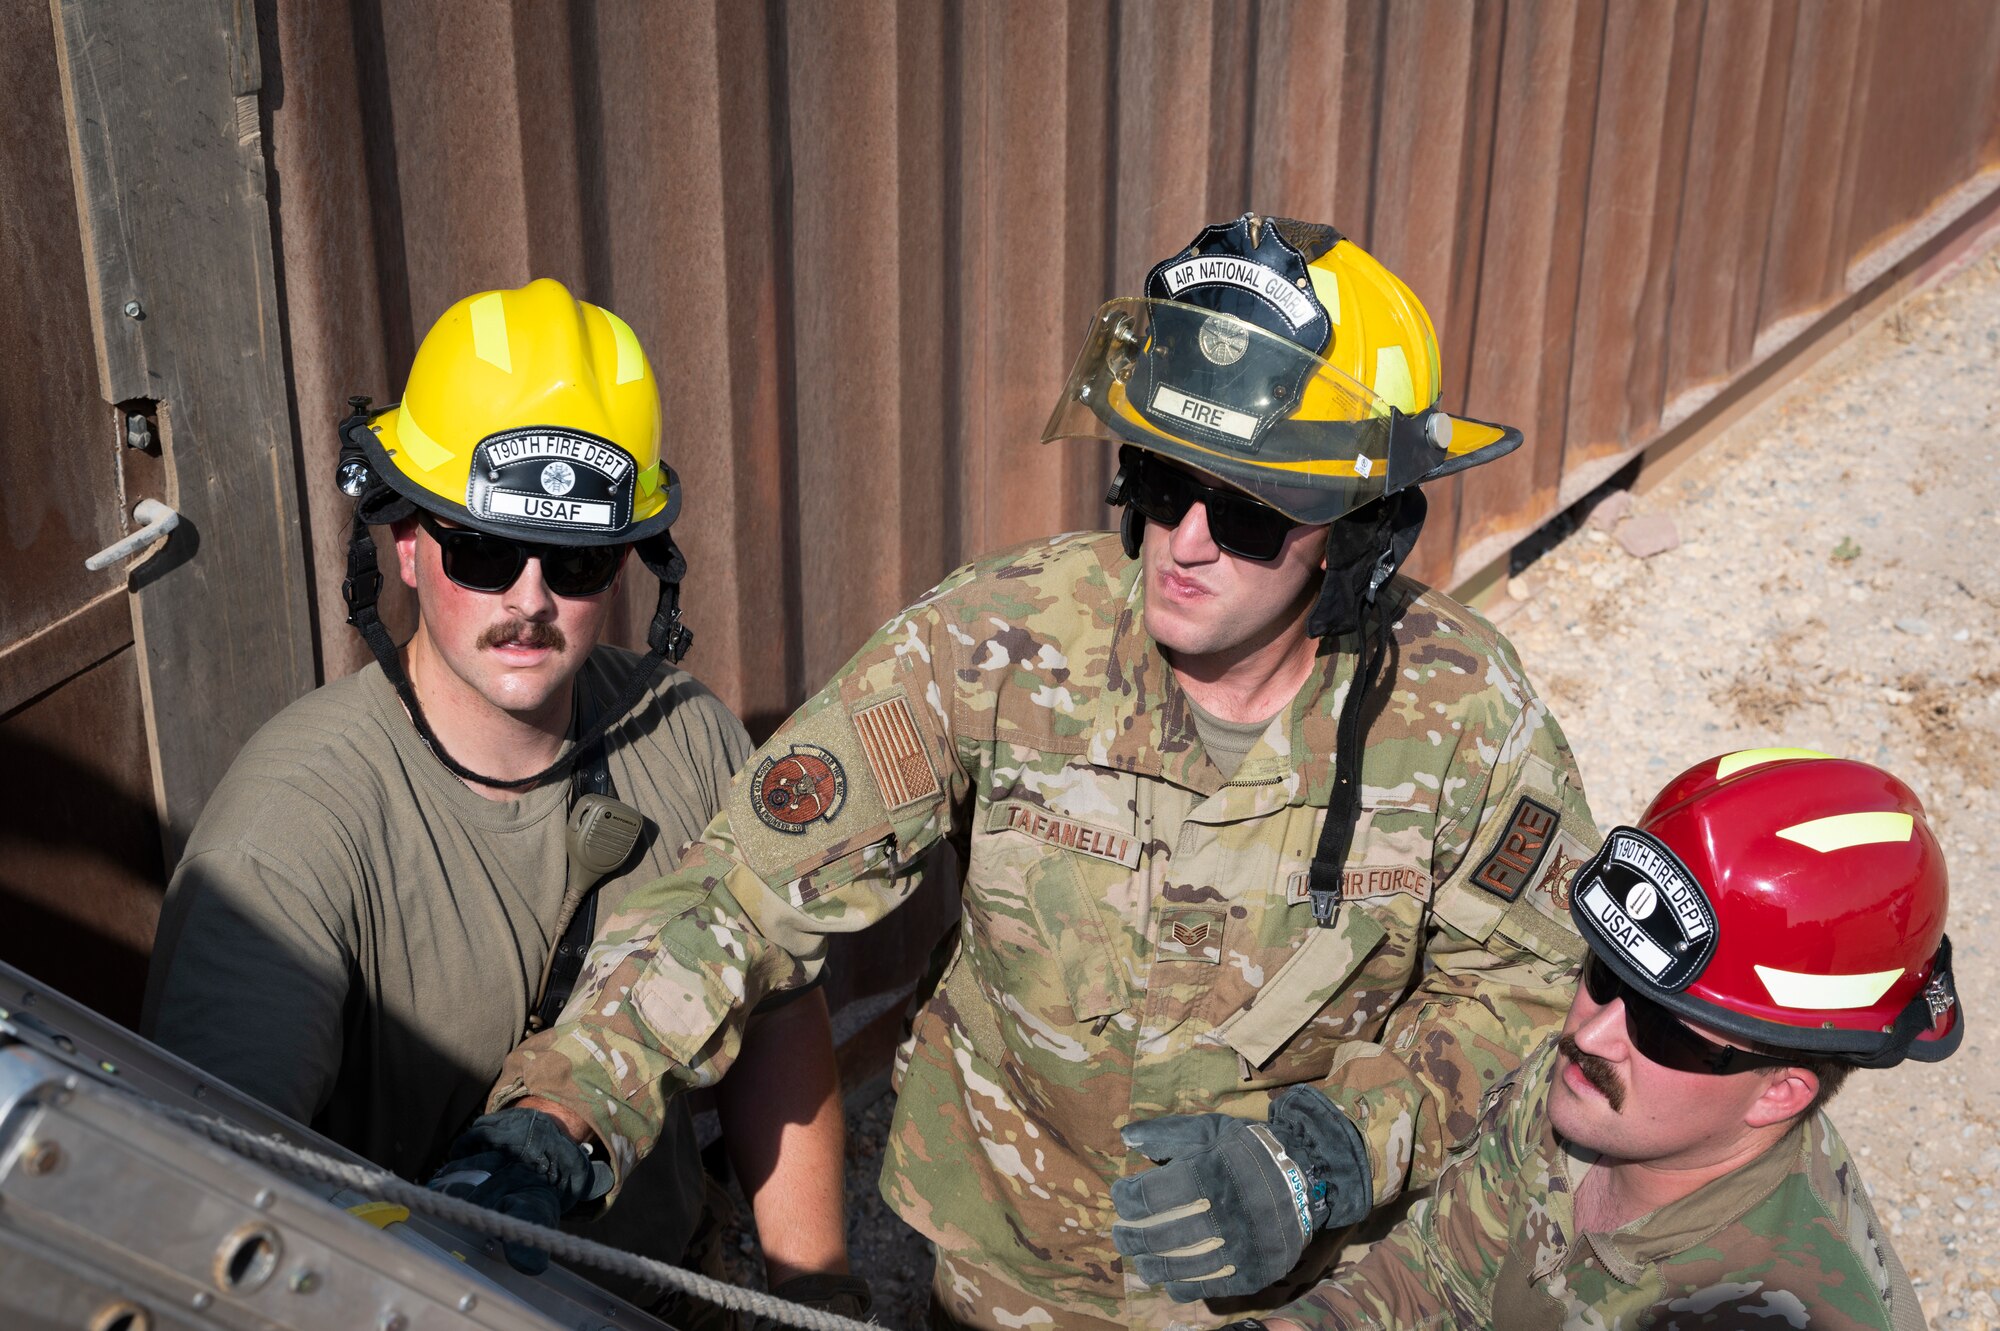 From left, U.S. Air Force Staff Sgt. Colton Stark, 386th Expeditionary Civil Engineer Squadron fire protection, Staff Sgt. Nicholas Tafanelli, 386th ECES fire protection, and Tech. Sgt. Christopher Welch, 386th ECES station captain, walkthrough ladder training at Ali Al Salem Air Base, Kuwait, August 7, 2022. Using the experiences and skills he has received throughout his career and in the Topeka Fire Department, he has worked with the team to craft training covering new techniques and tactics in the fire protection career field. Tafanelli was recently recognized at the United Service Organizations Service Member of the Year award for responding to 318 emergencies, including 61 fires and 128 motor vehicle accidents as a firefighter in Topeka, Kansas. (U.S. Air Force photo by Staff Sgt. Dalton Williams)